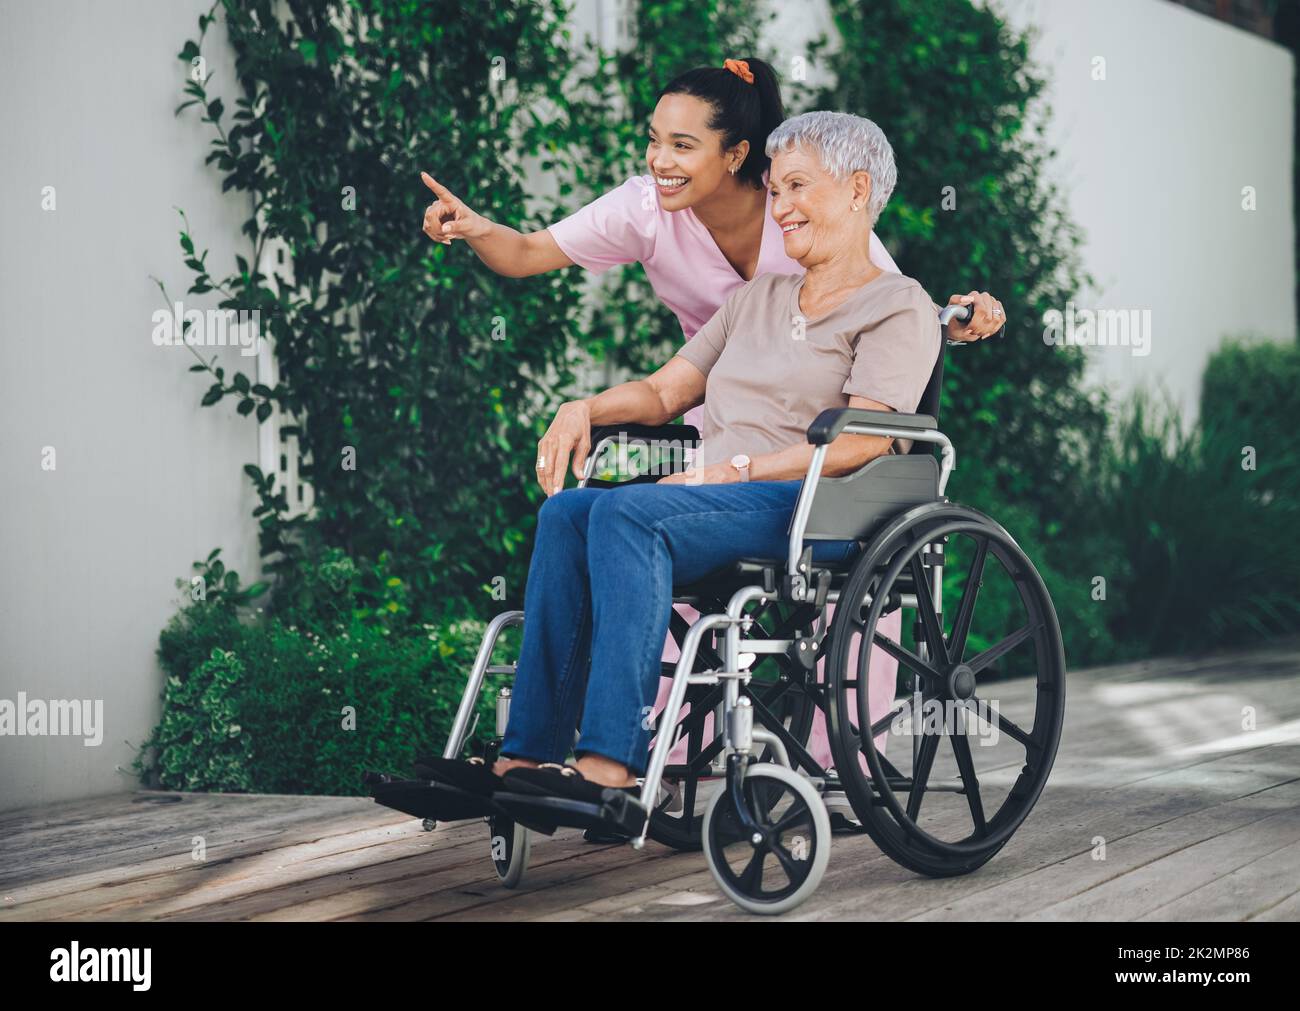 An older body for a timeless spirit. Shot of a young nurse caring for an older woman in a wheelchair. Stock Photo